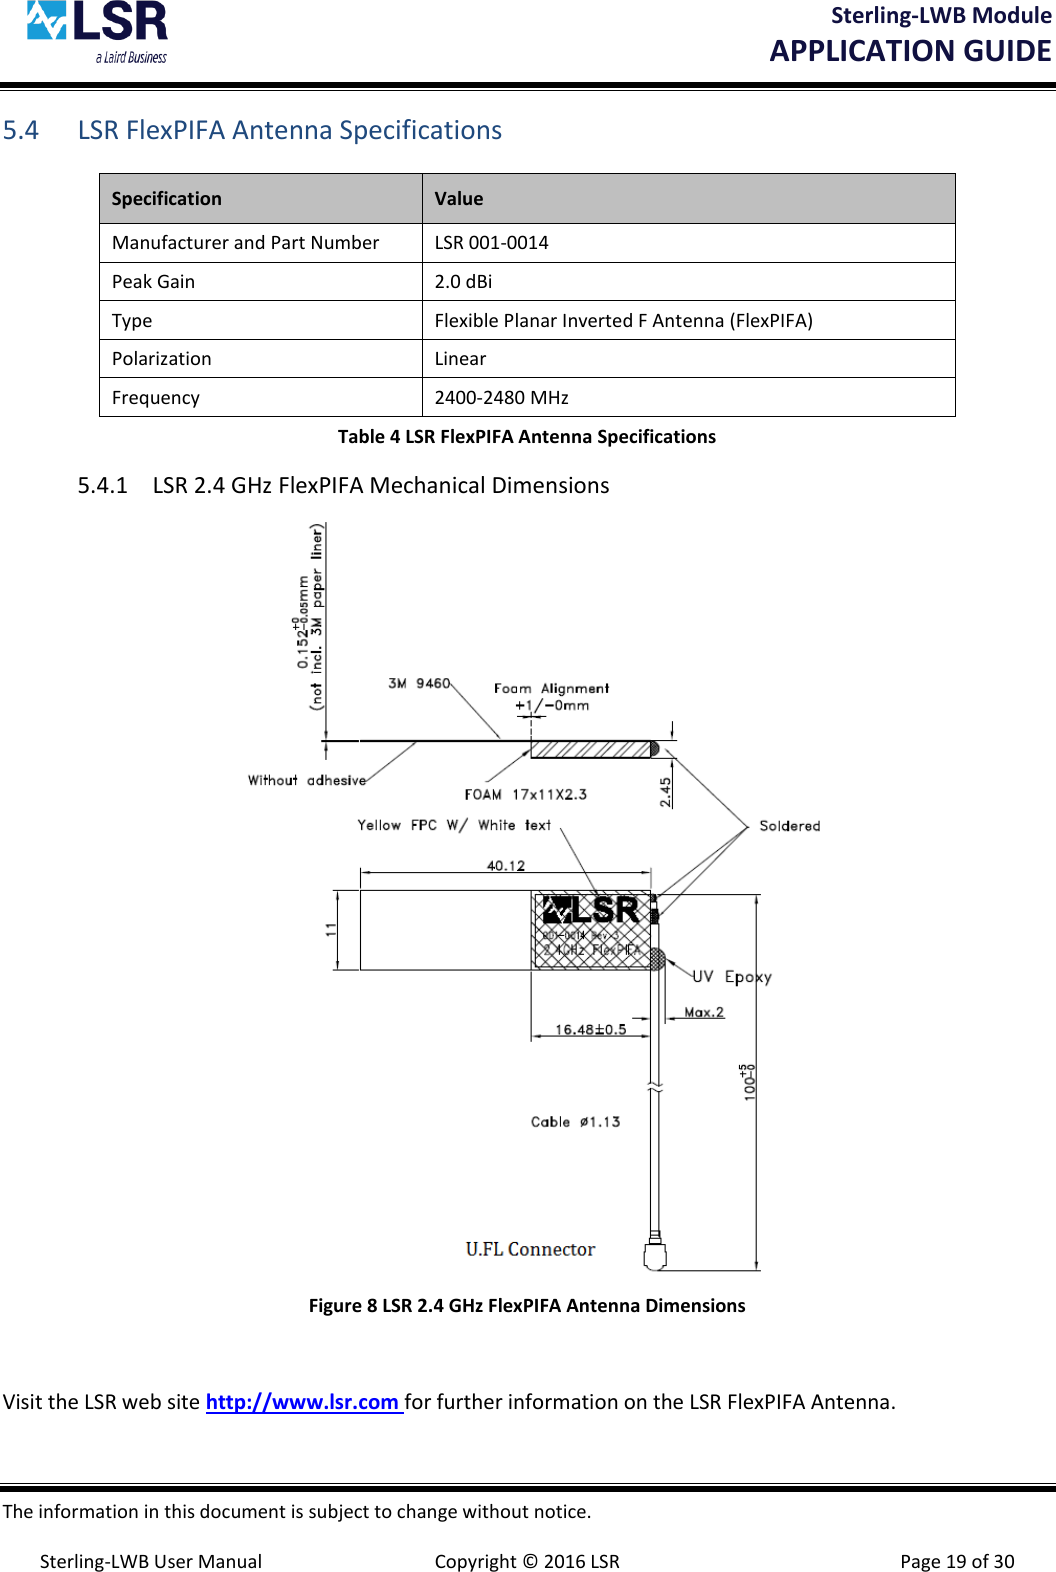 Sterling-LWB Module       APPLICATION GUIDE  The information in this document is subject to change without notice.  Sterling-LWB User Manual  Copyright © 2016 LSR  Page 19 of 30 5.4 LSR FlexPIFA Antenna Specifications Specification Value Manufacturer and Part Number LSR 001-0014 Peak Gain  2.0 dBi Type Flexible Planar Inverted F Antenna (FlexPIFA) Polarization Linear Frequency 2400-2480 MHz Table 4 LSR FlexPIFA Antenna Specifications 5.4.1 LSR 2.4 GHz FlexPIFA Mechanical Dimensions  Figure 8 LSR 2.4 GHz FlexPIFA Antenna Dimensions  Visit the LSR web site http://www.lsr.com for further information on the LSR FlexPIFA Antenna. 